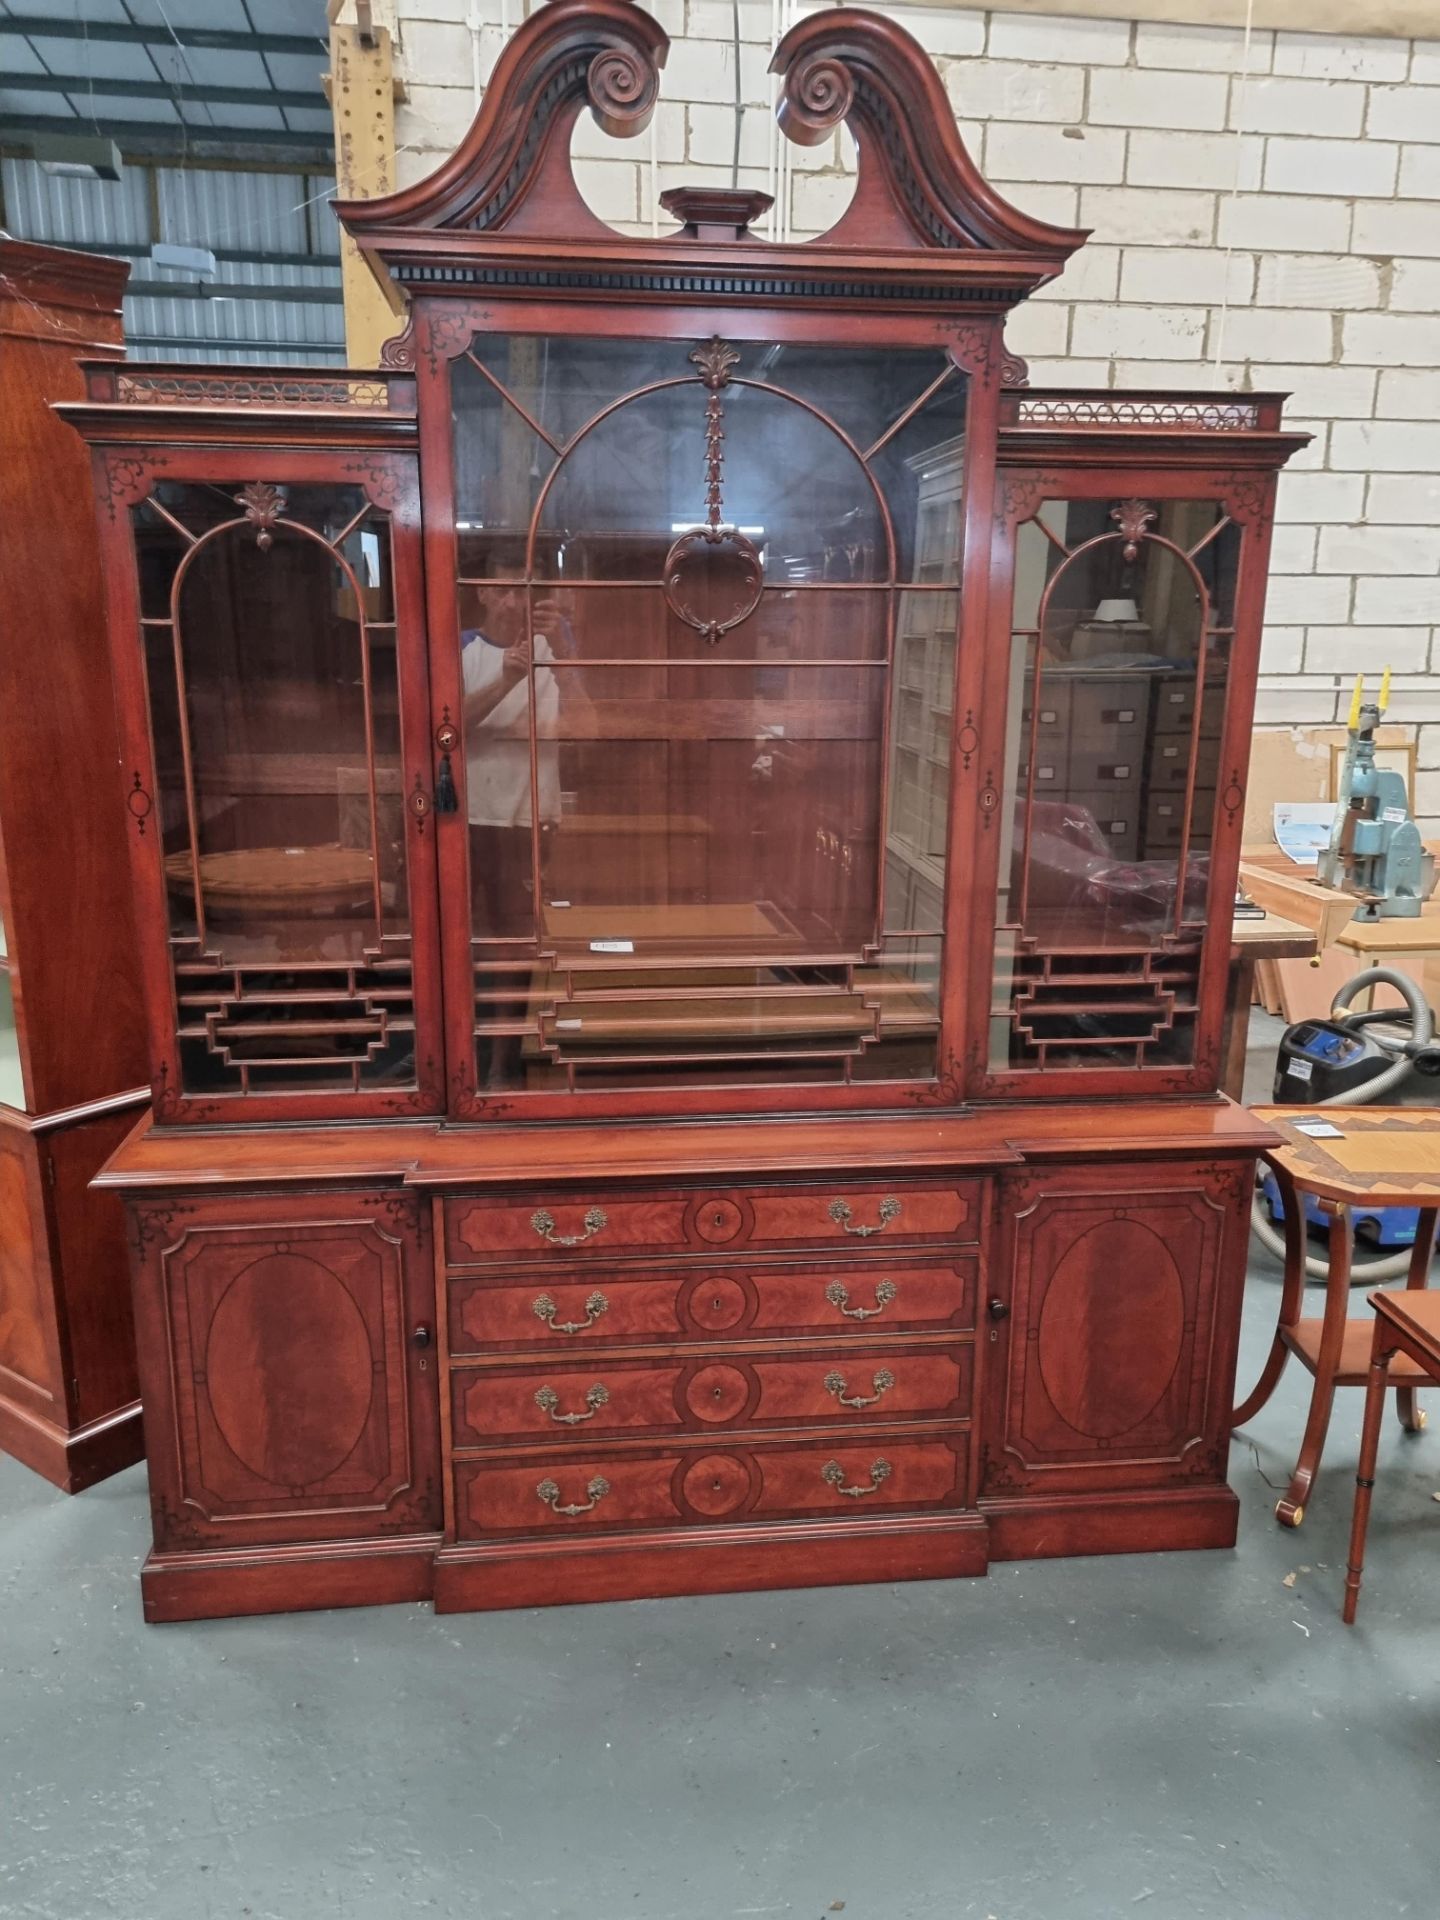 Arthur Brett Chippendale Style Carved Mahogany Bureau Bookcase This Extremely Fine Carved Piece Is - Bild 2 aus 3